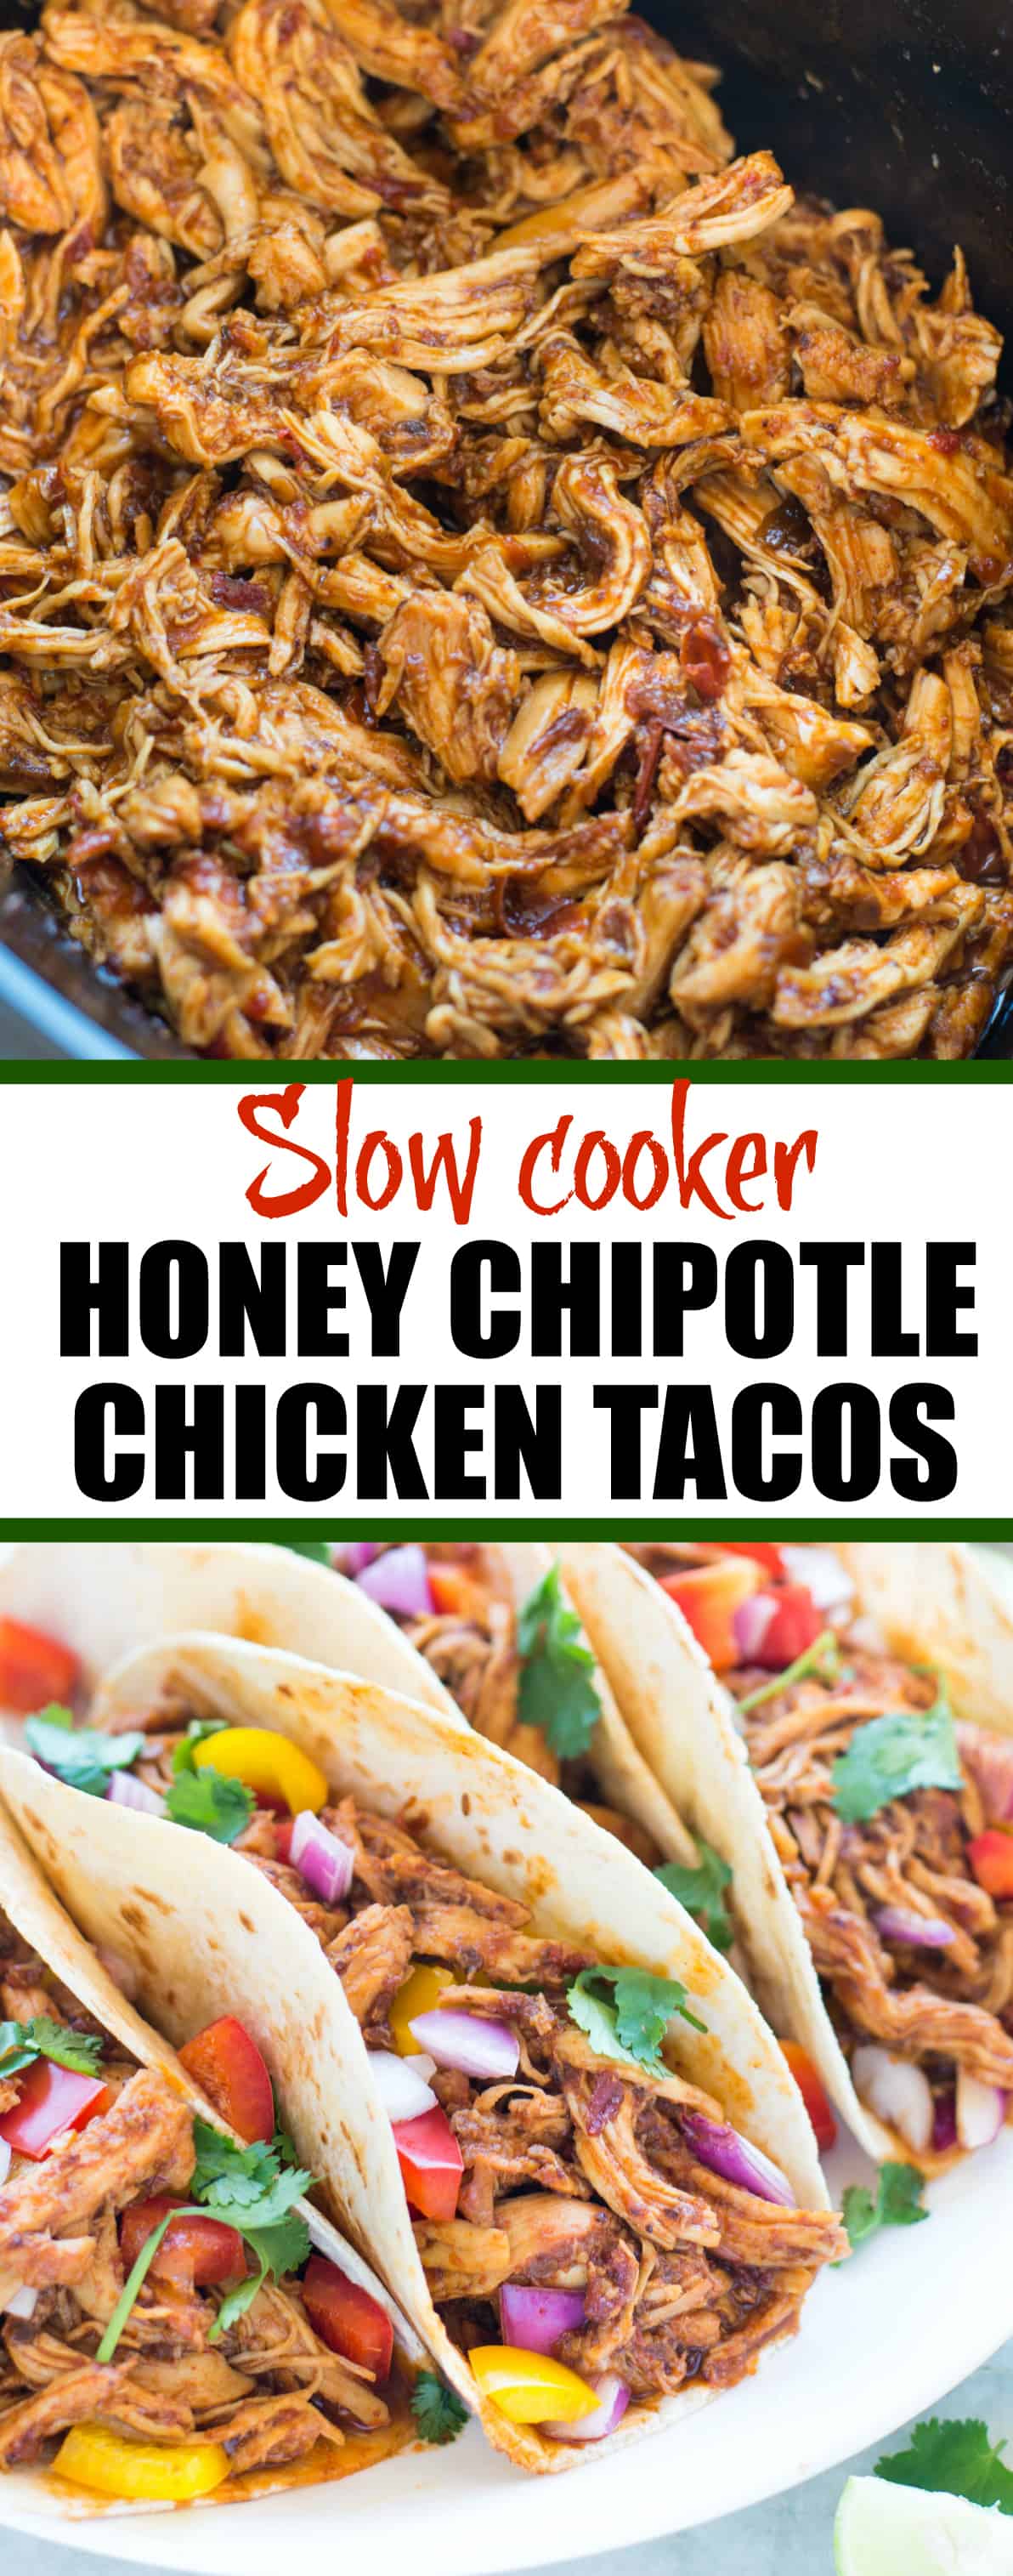 SLOW COOKER HONEY CHIPOTLE CHICKEN TACO - The flavours of kitchen